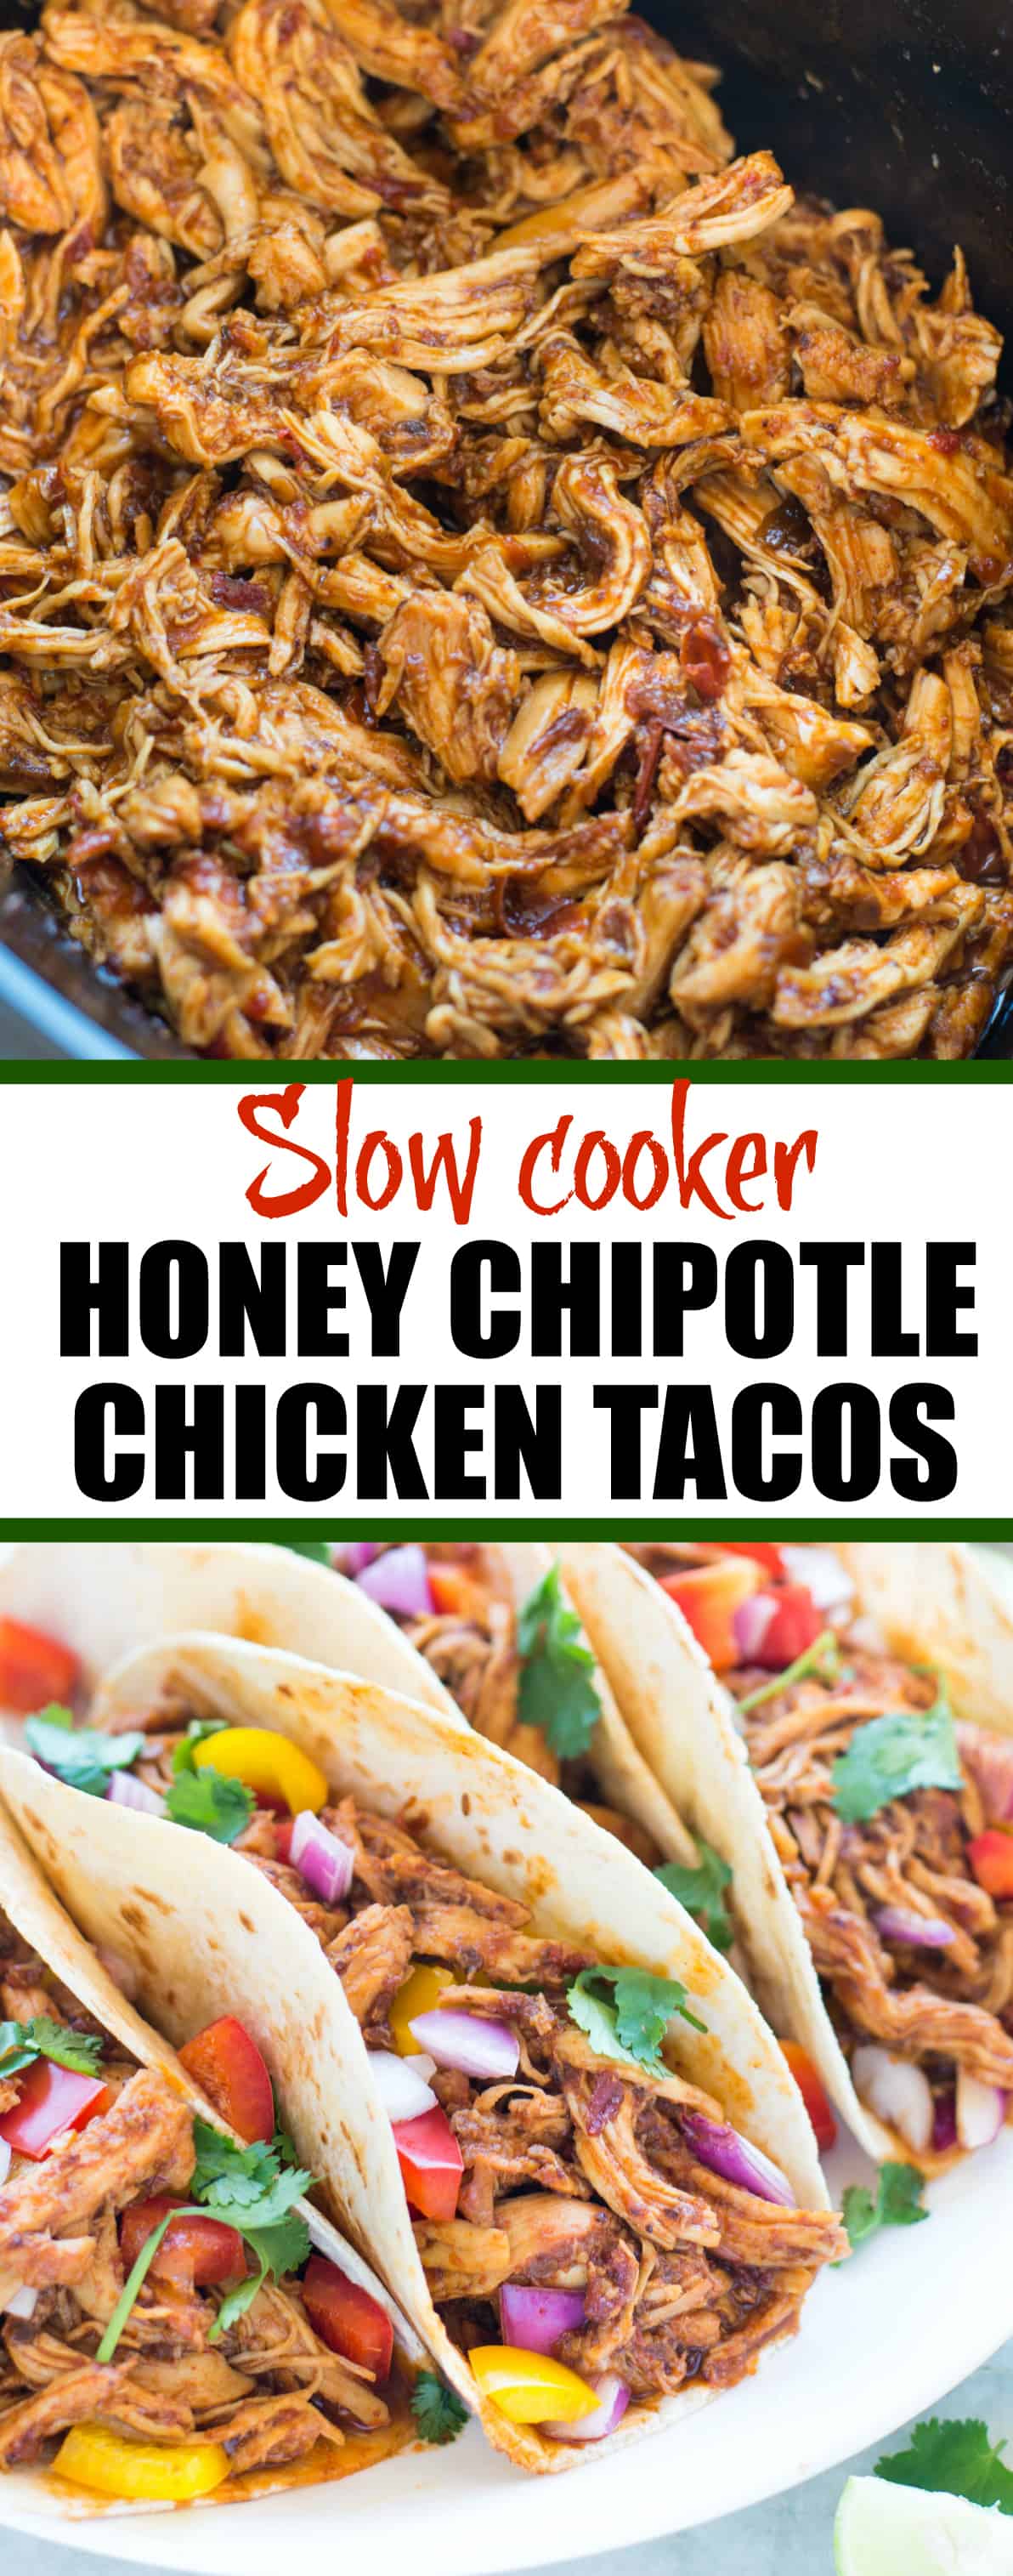 SLOW COOKER HONEY CHIPOTLE CHICKEN TACO - The flavours of kitchen